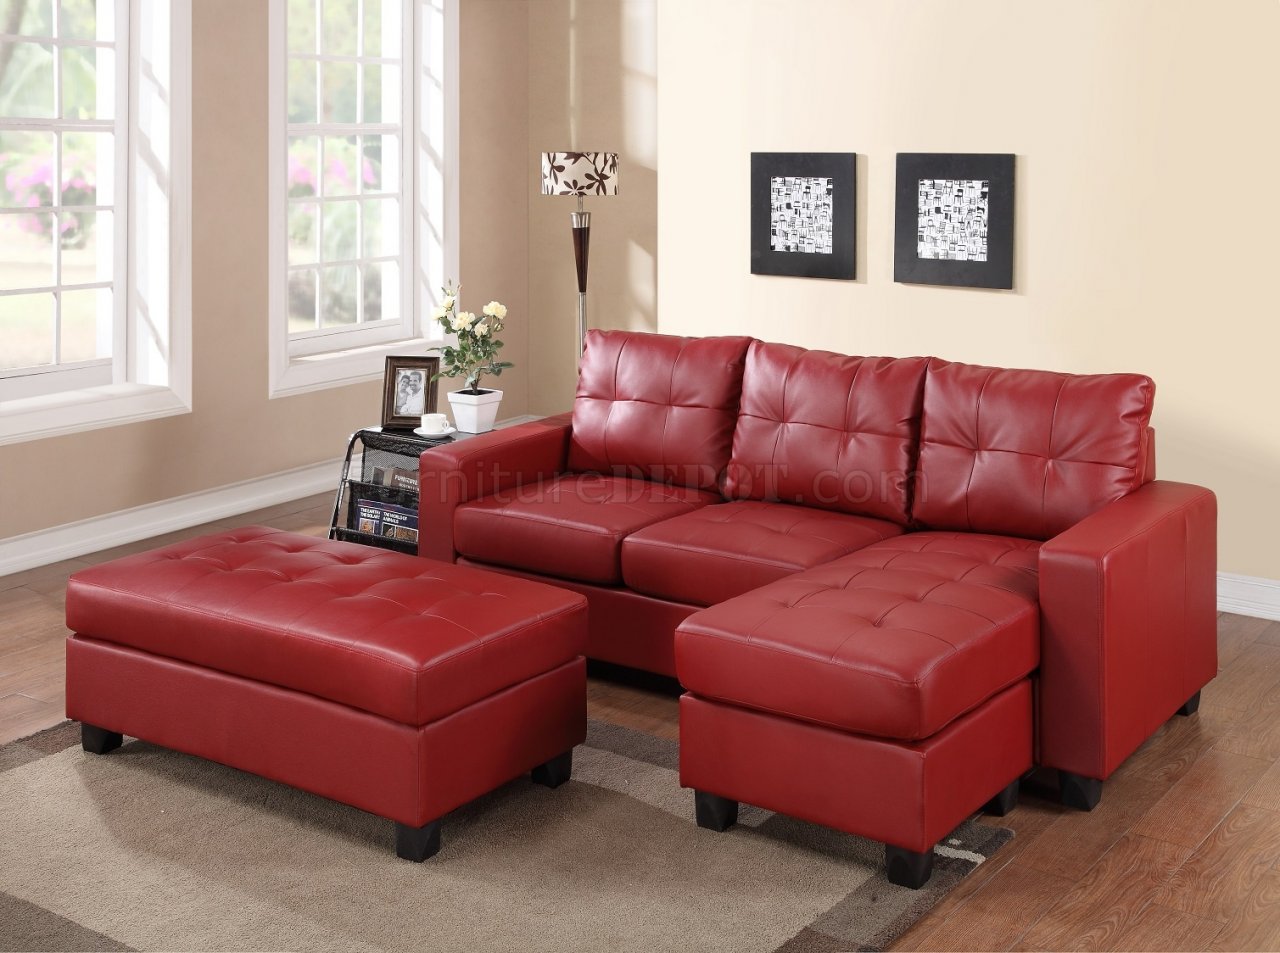 2511 Sectional Sofa Set In Red Bonded, Red Leather Sectional Sofas